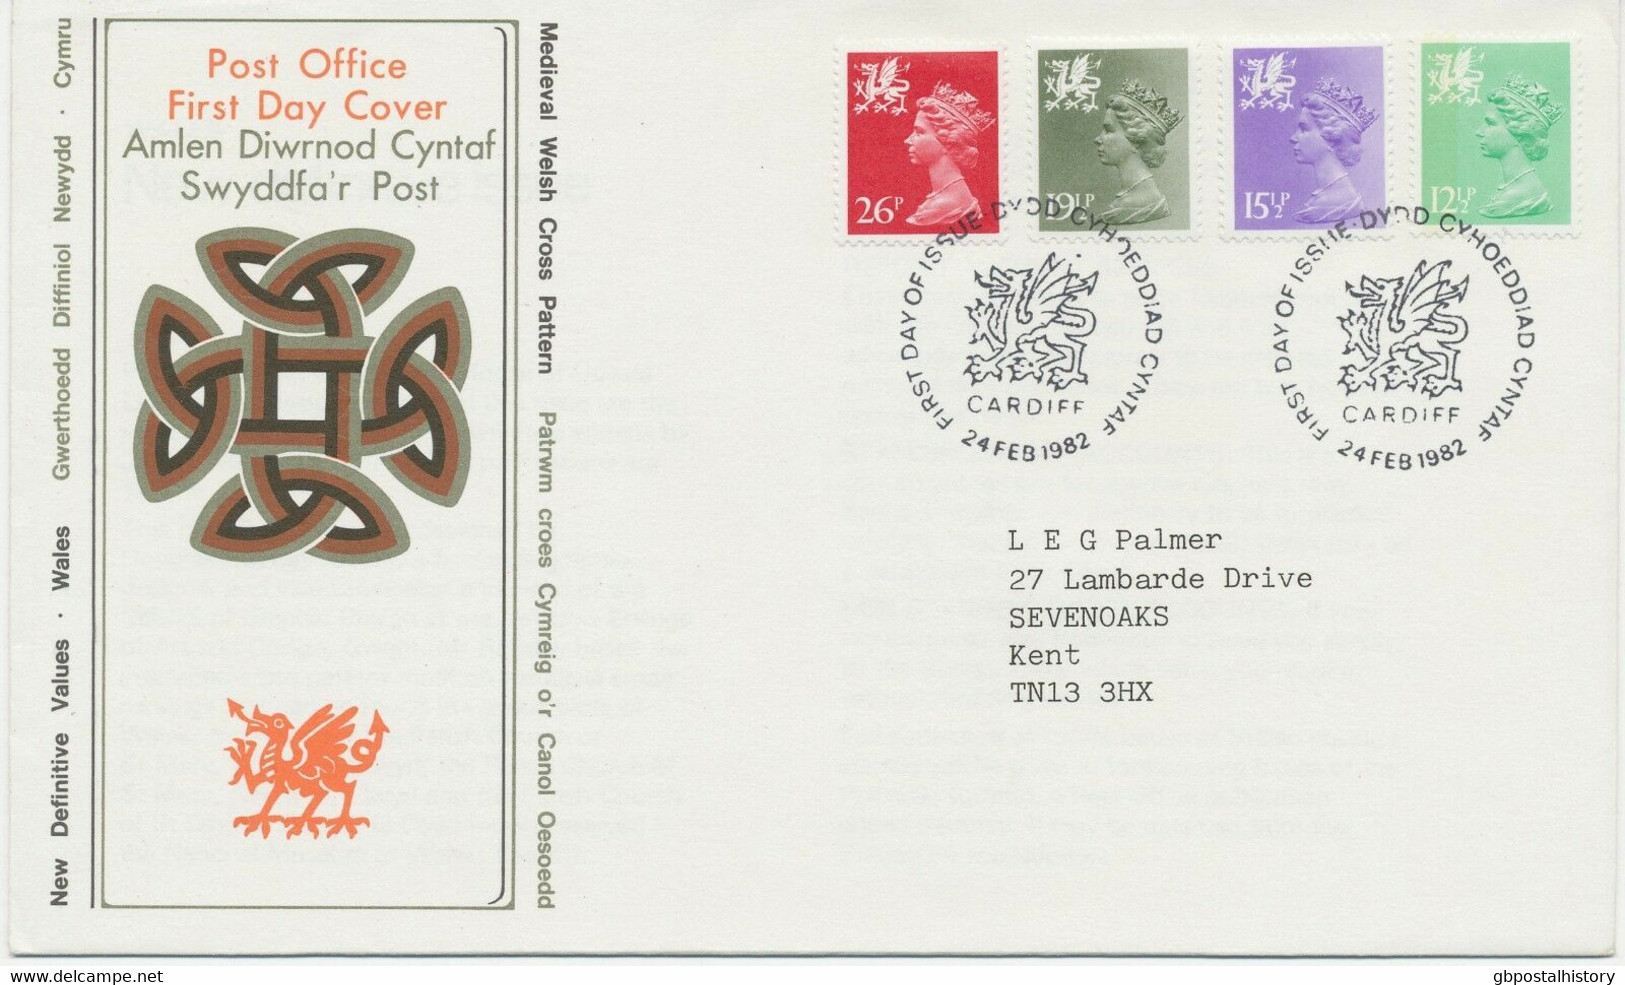 GB REGIONALS WALES 1982 Machin 12 1/2 P, 15 1/2 P, 19 1/2 P And 26 P FDC CARDIFF - Wales